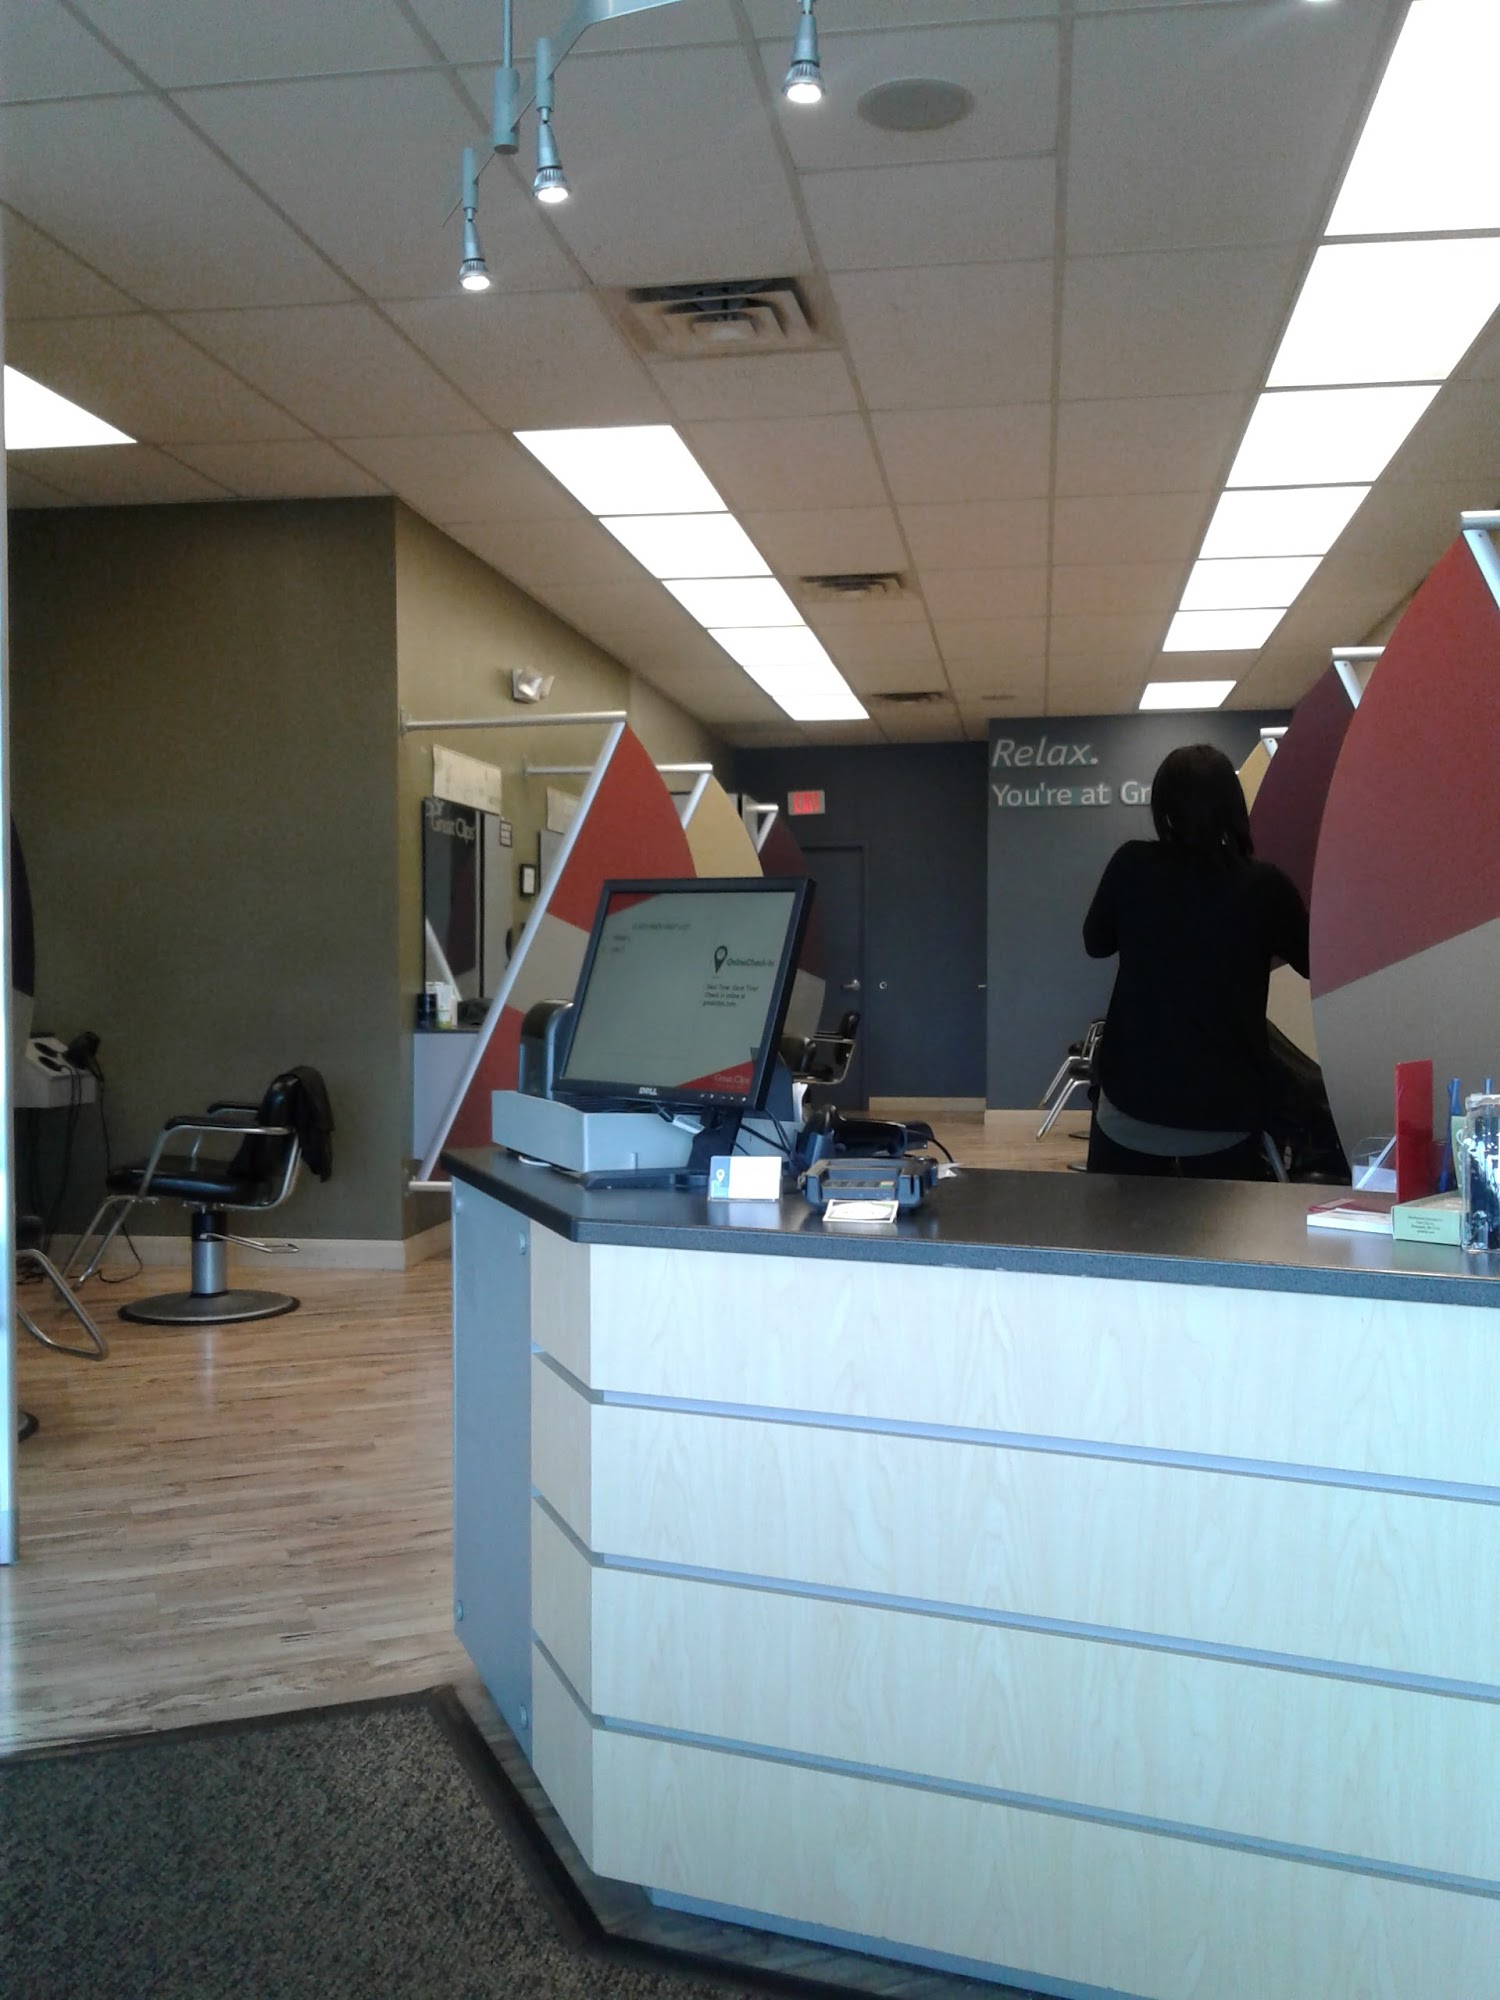 Great Clips 5936B Crawfordsville Rd, Speedway Indiana 46224